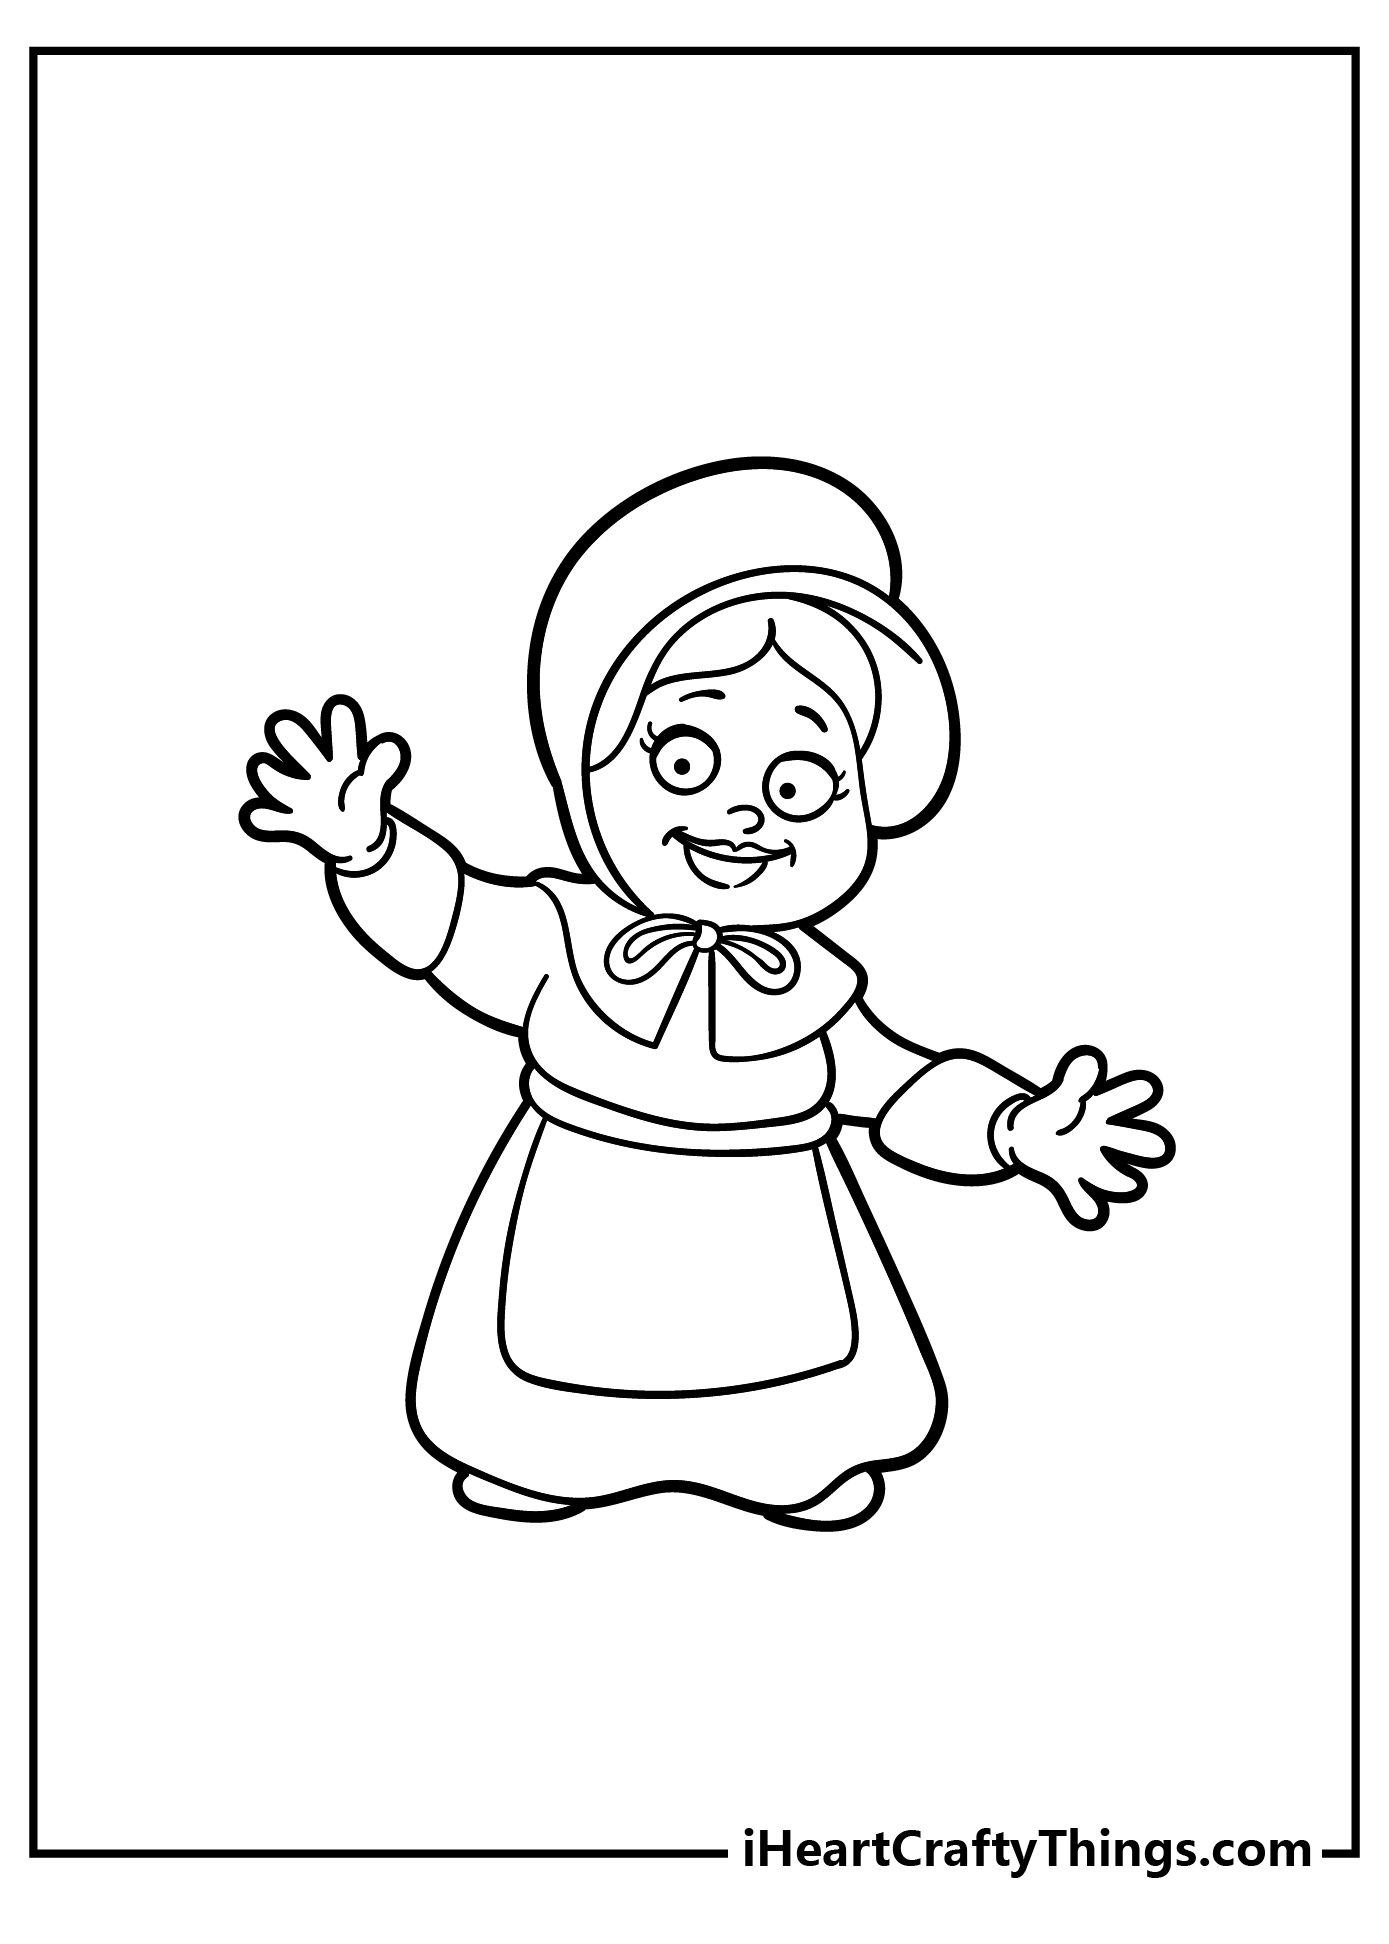 Pilgrim Coloring Pages for adults free printable